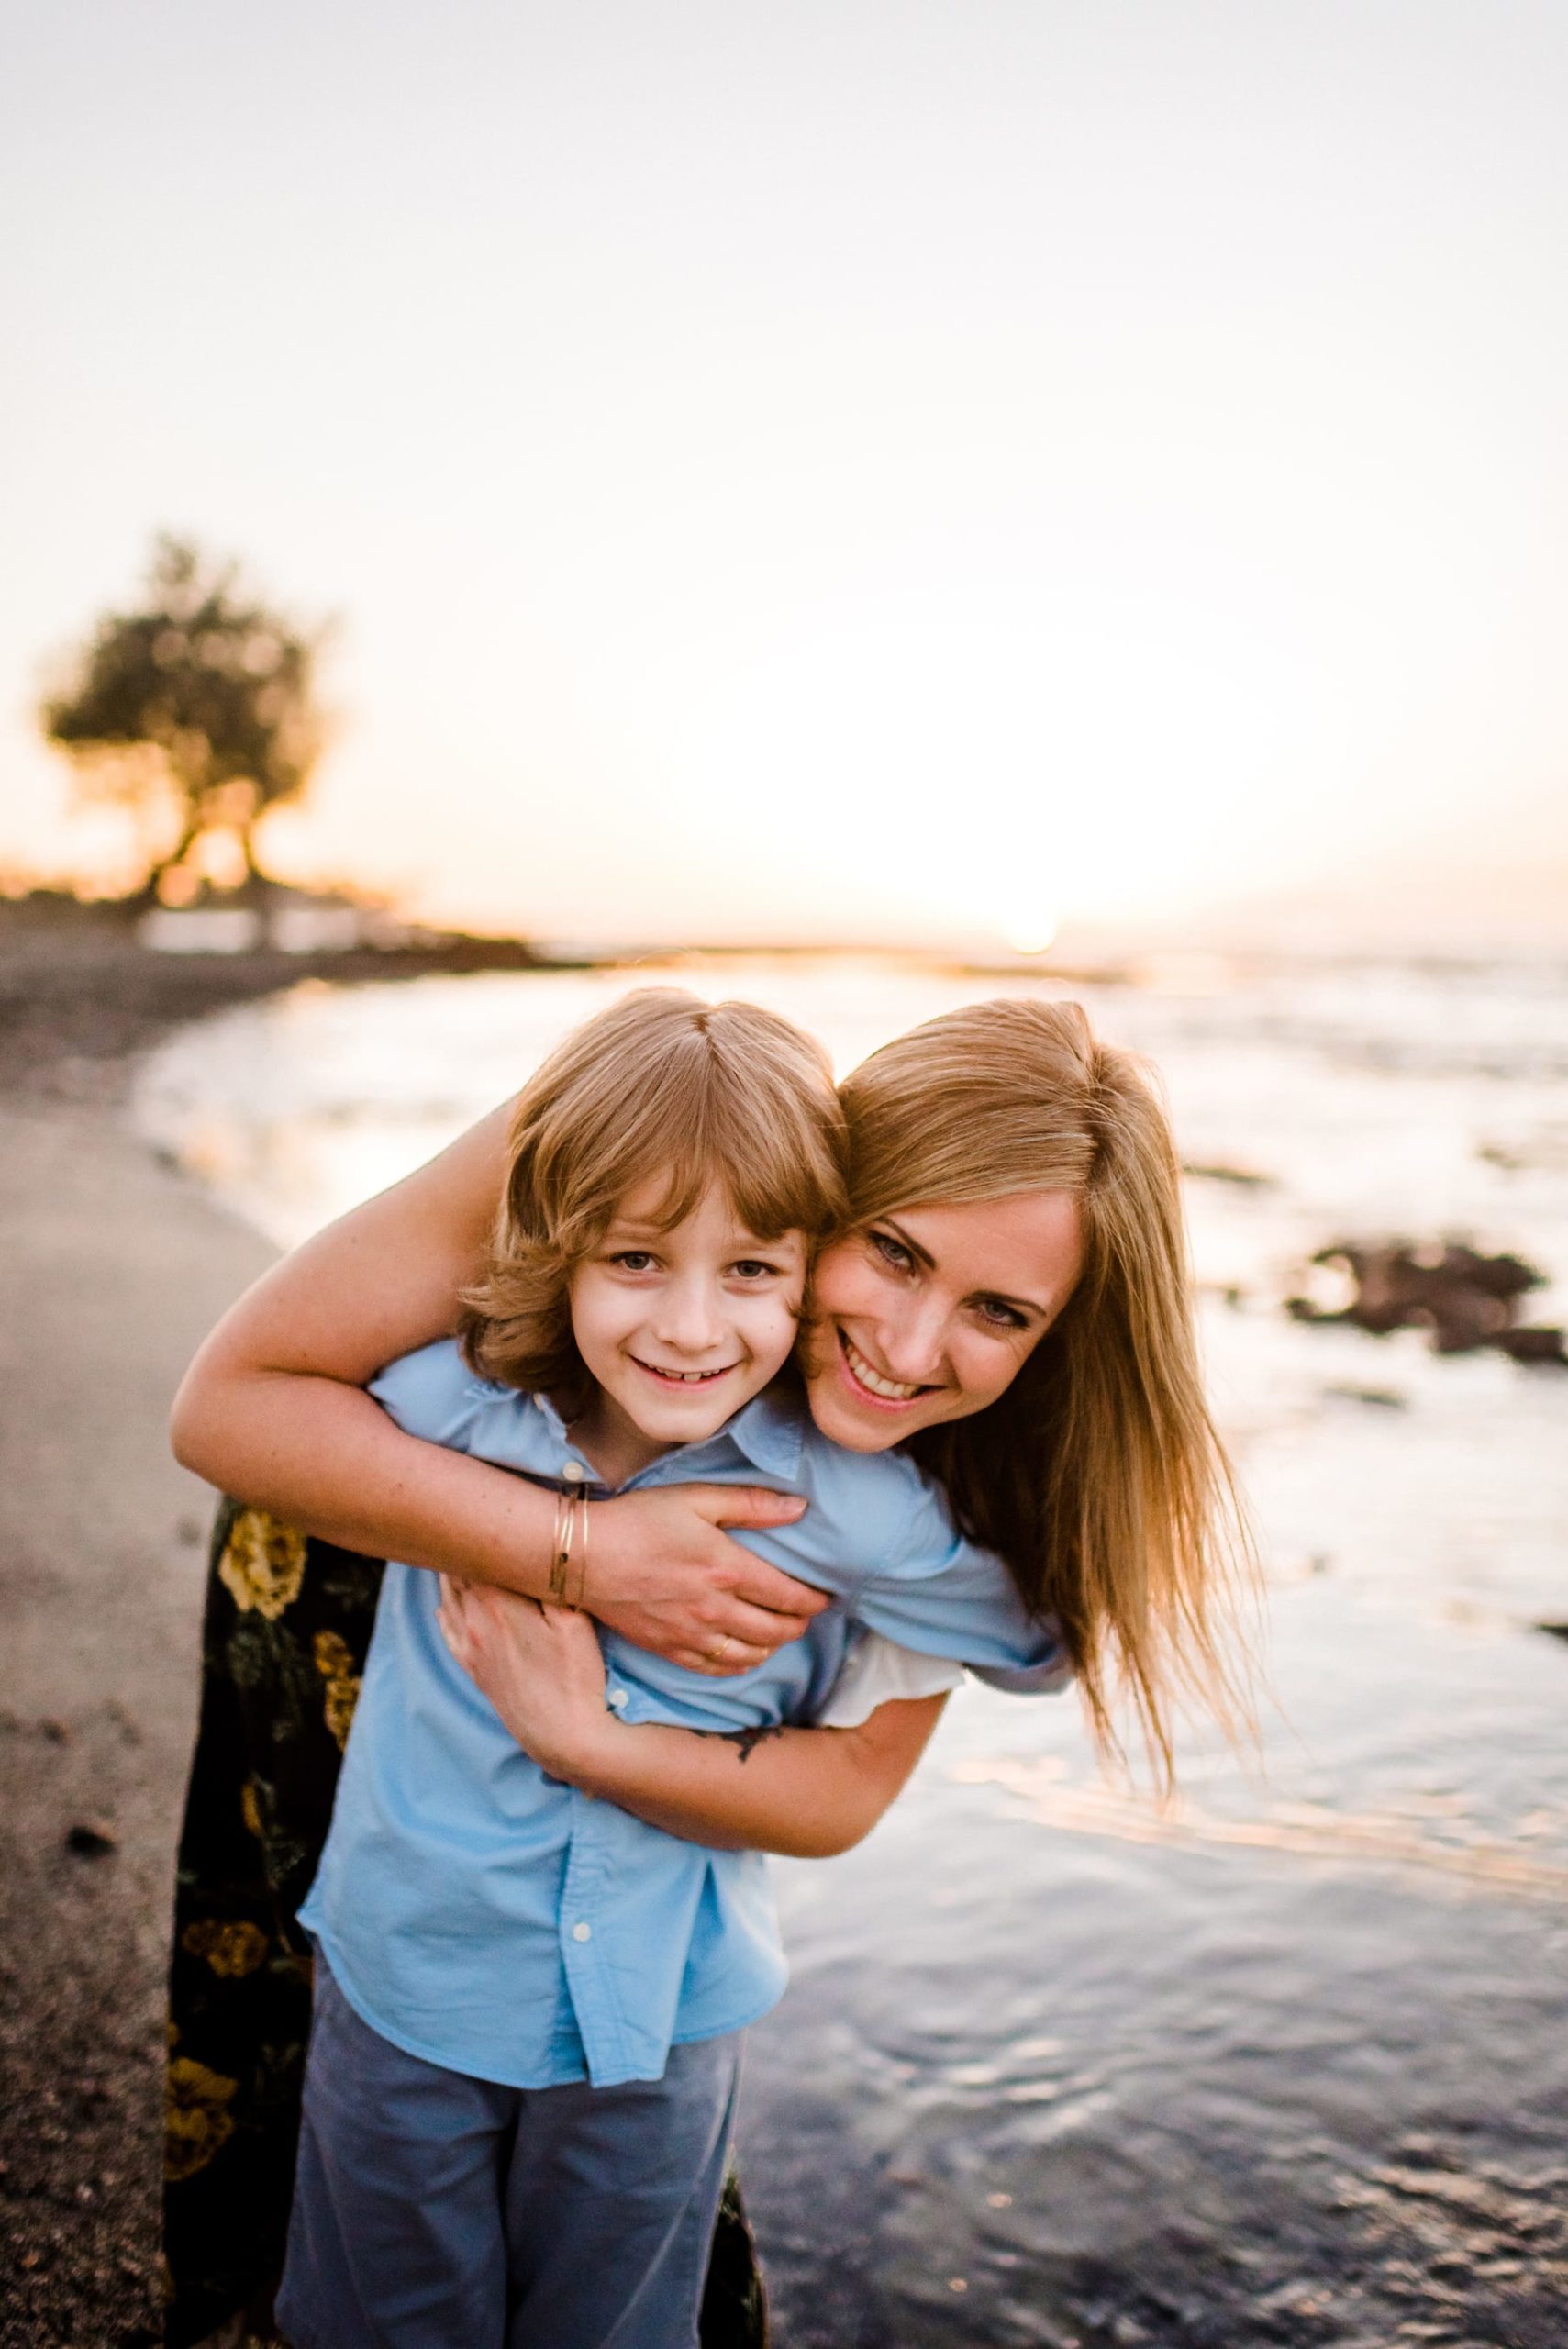 Mother-Son-Photo-Session-Hawaii-Sunset-09.jpg